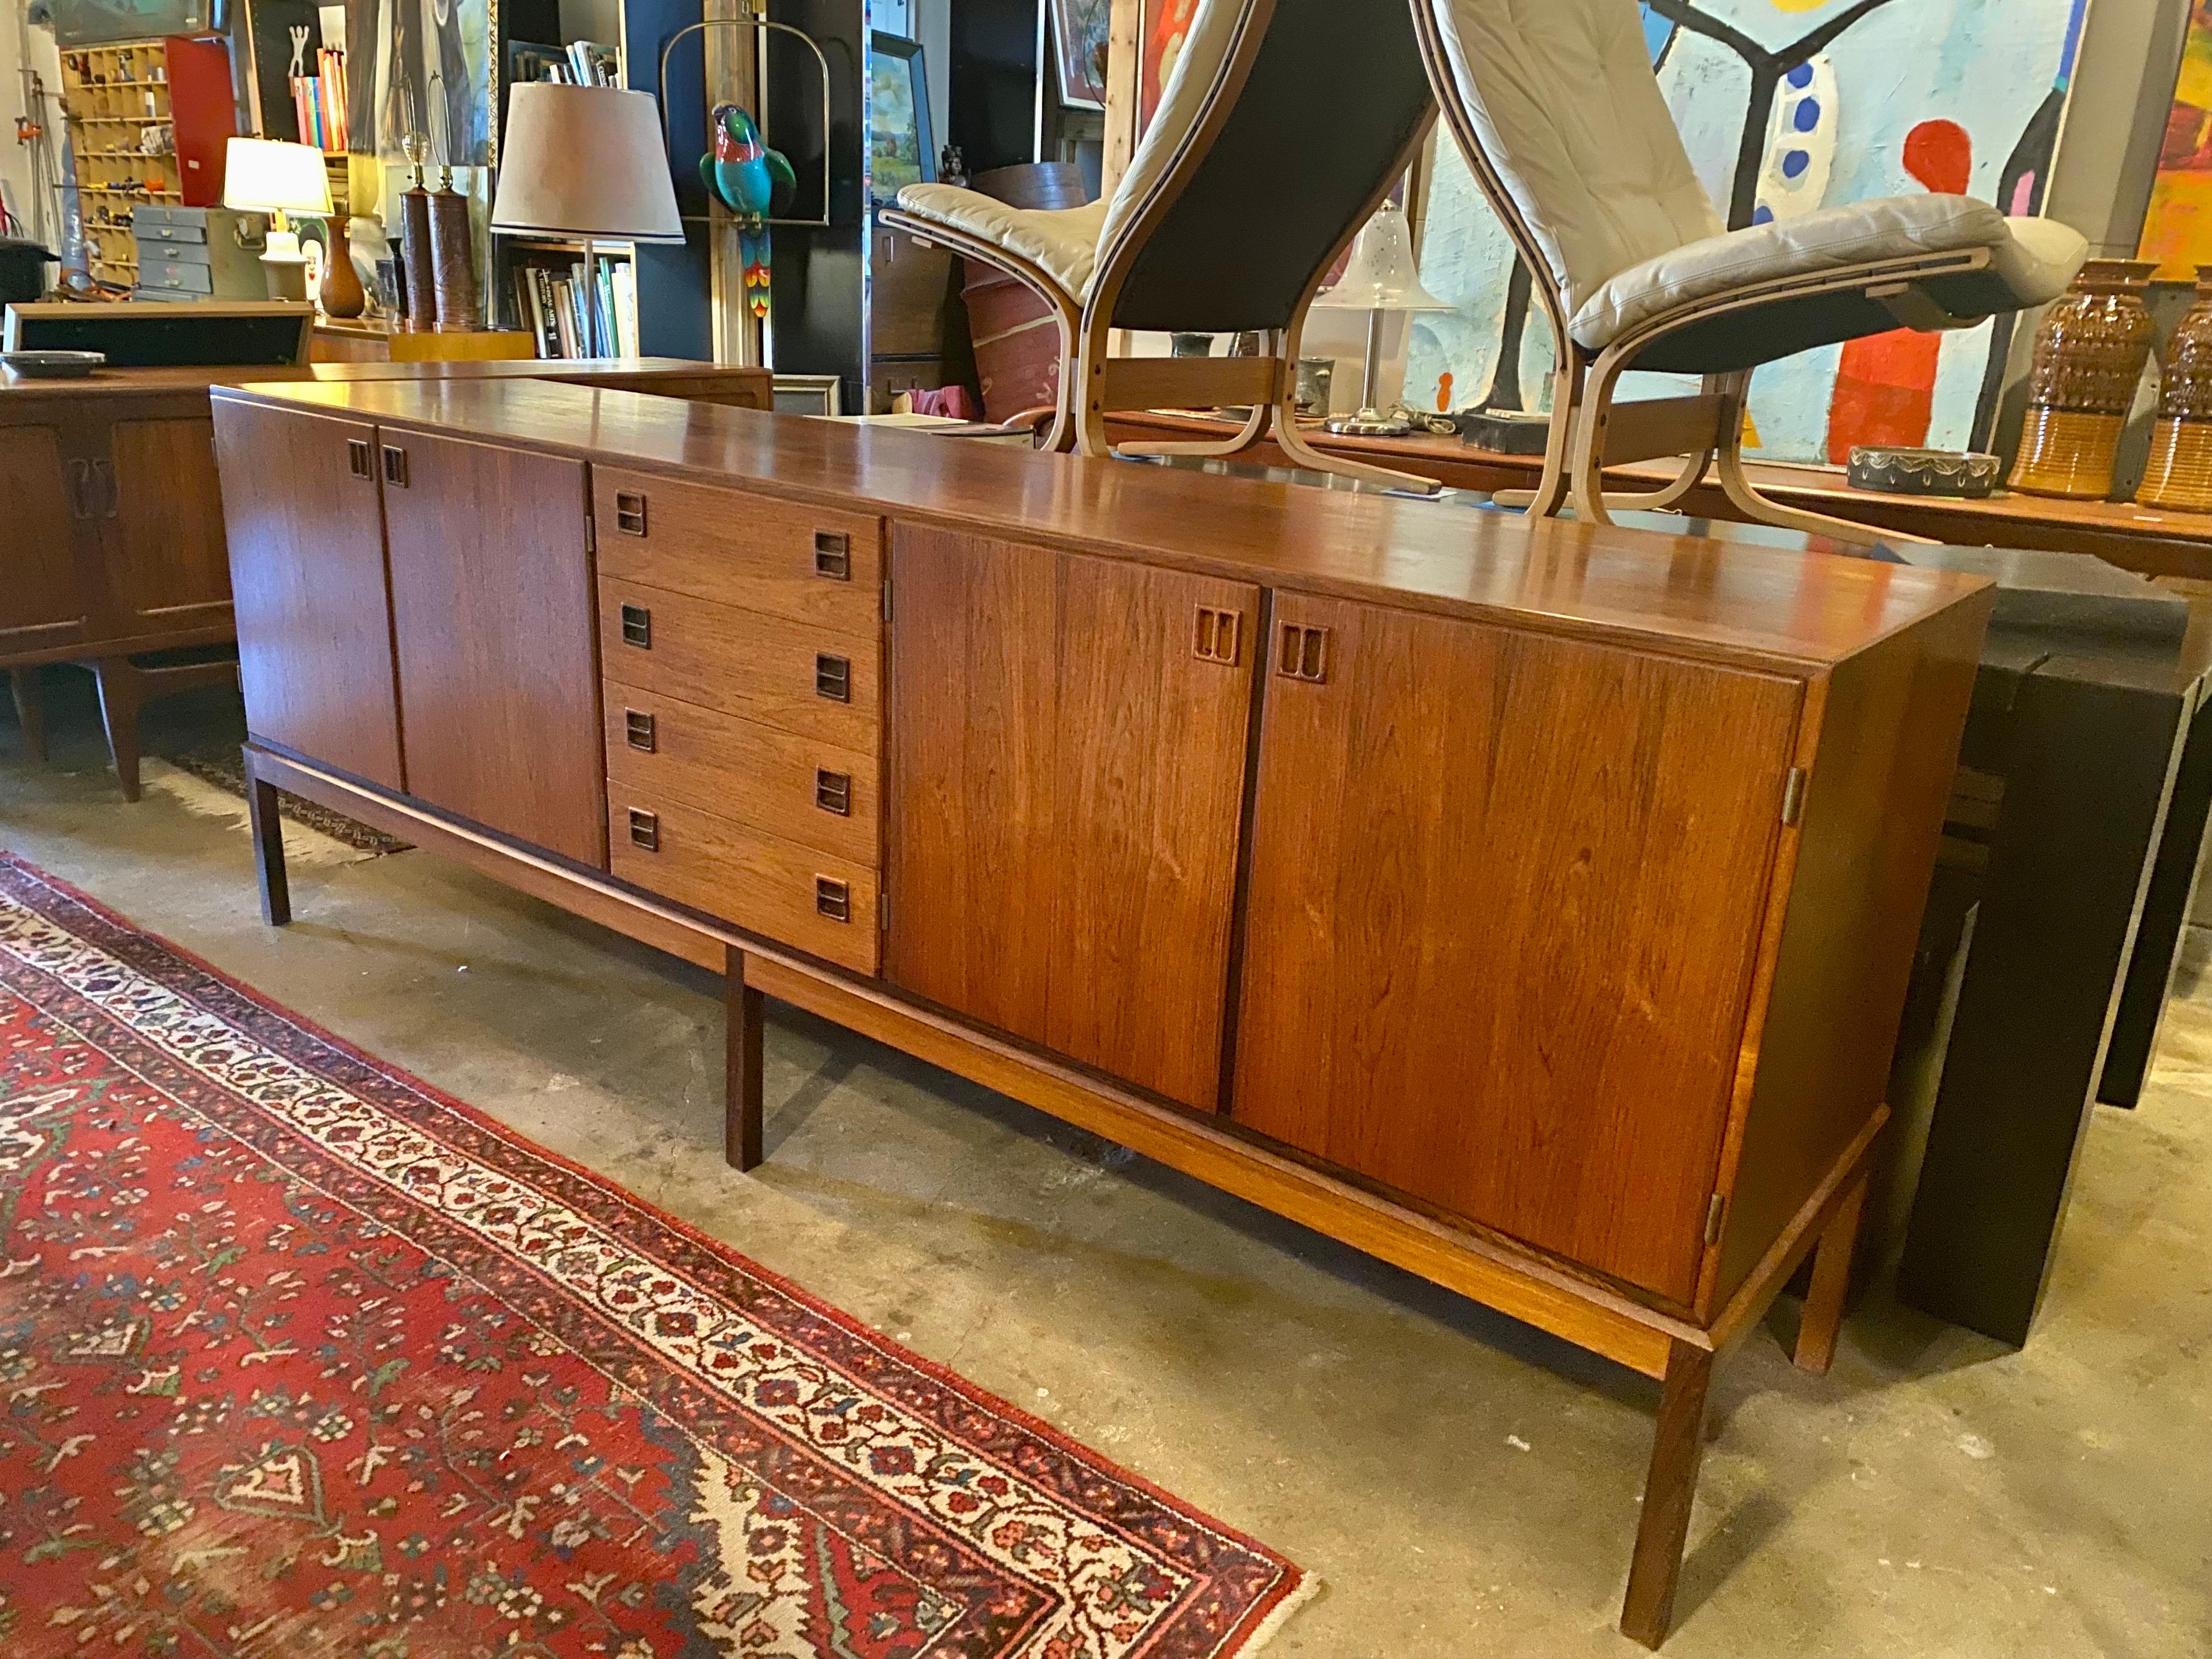 Danish modern sideboard by Johannes Andersen for Bernhard Pedersen & Son made of rosewood features plenty of storage space and beautifully sculpted handles. The left side of the credenza opens up to adjustable shelving and four trays lined with